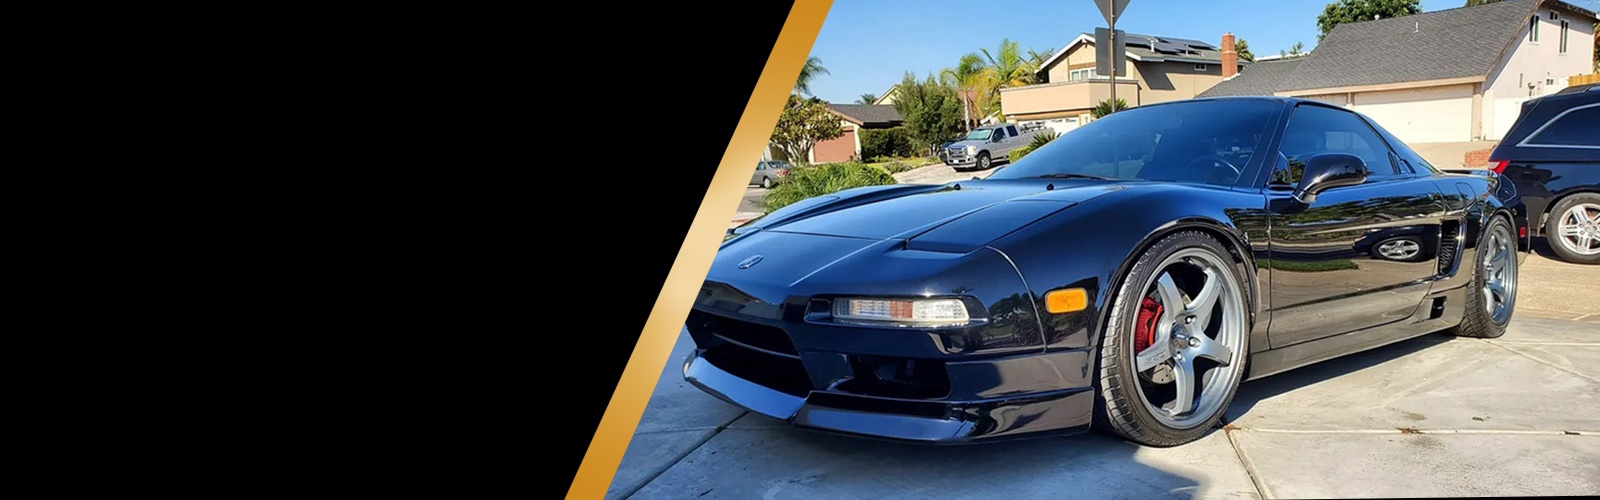 Enhance Your Car's Appearance With Professional Paint Correction in Pomona, CA 